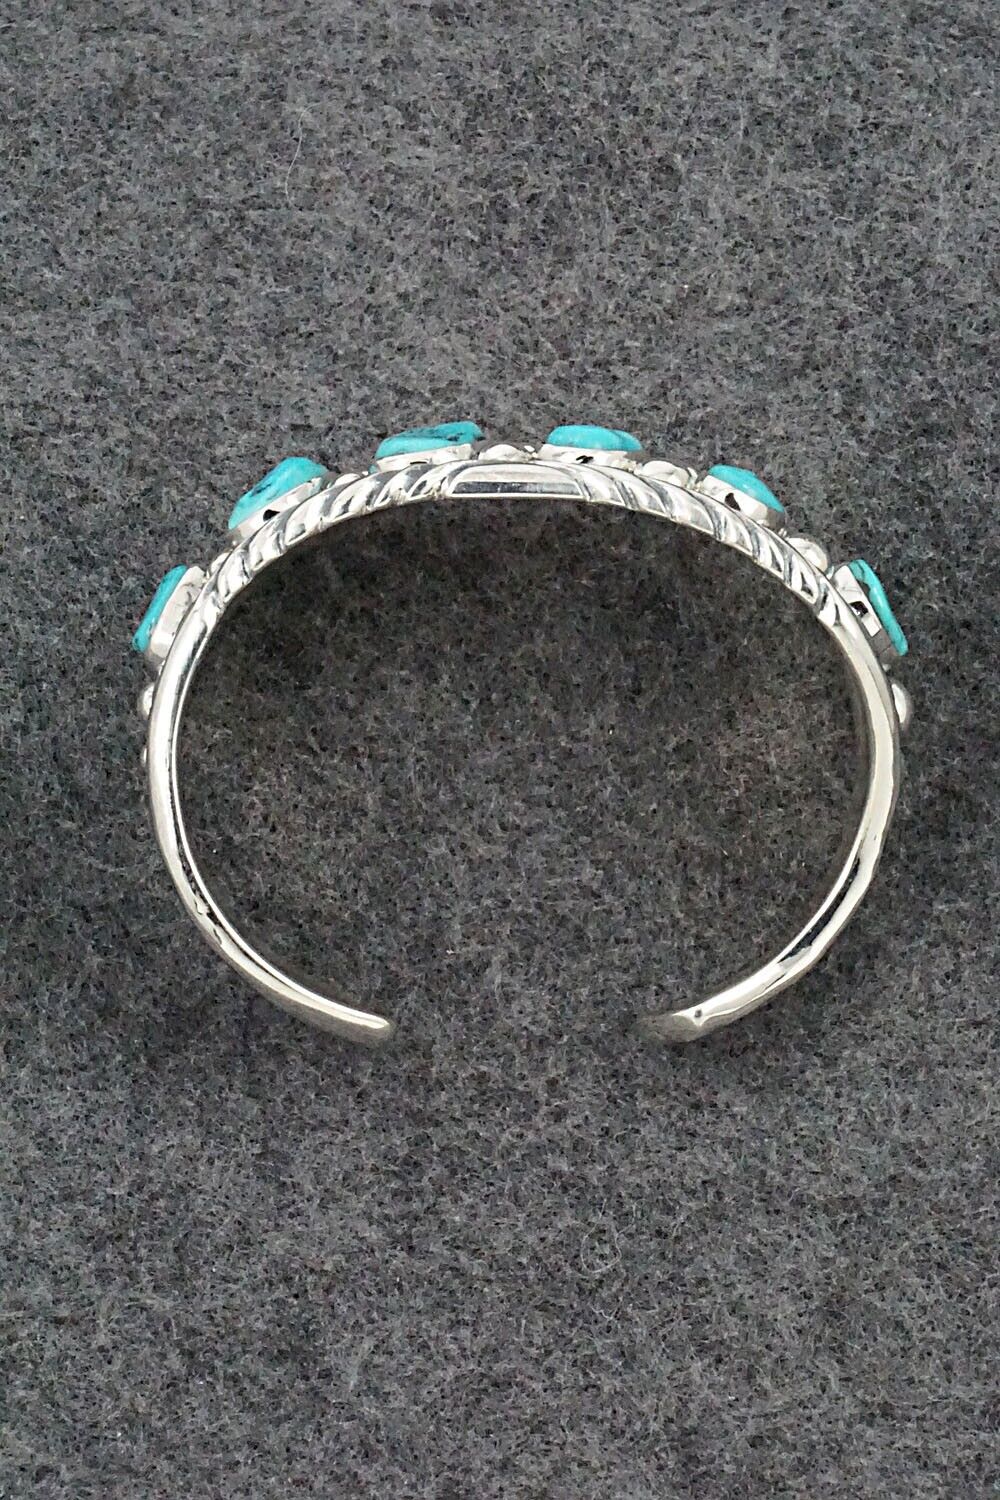 Turquoise & Sterling Silver Bracelet - Tommy Moore